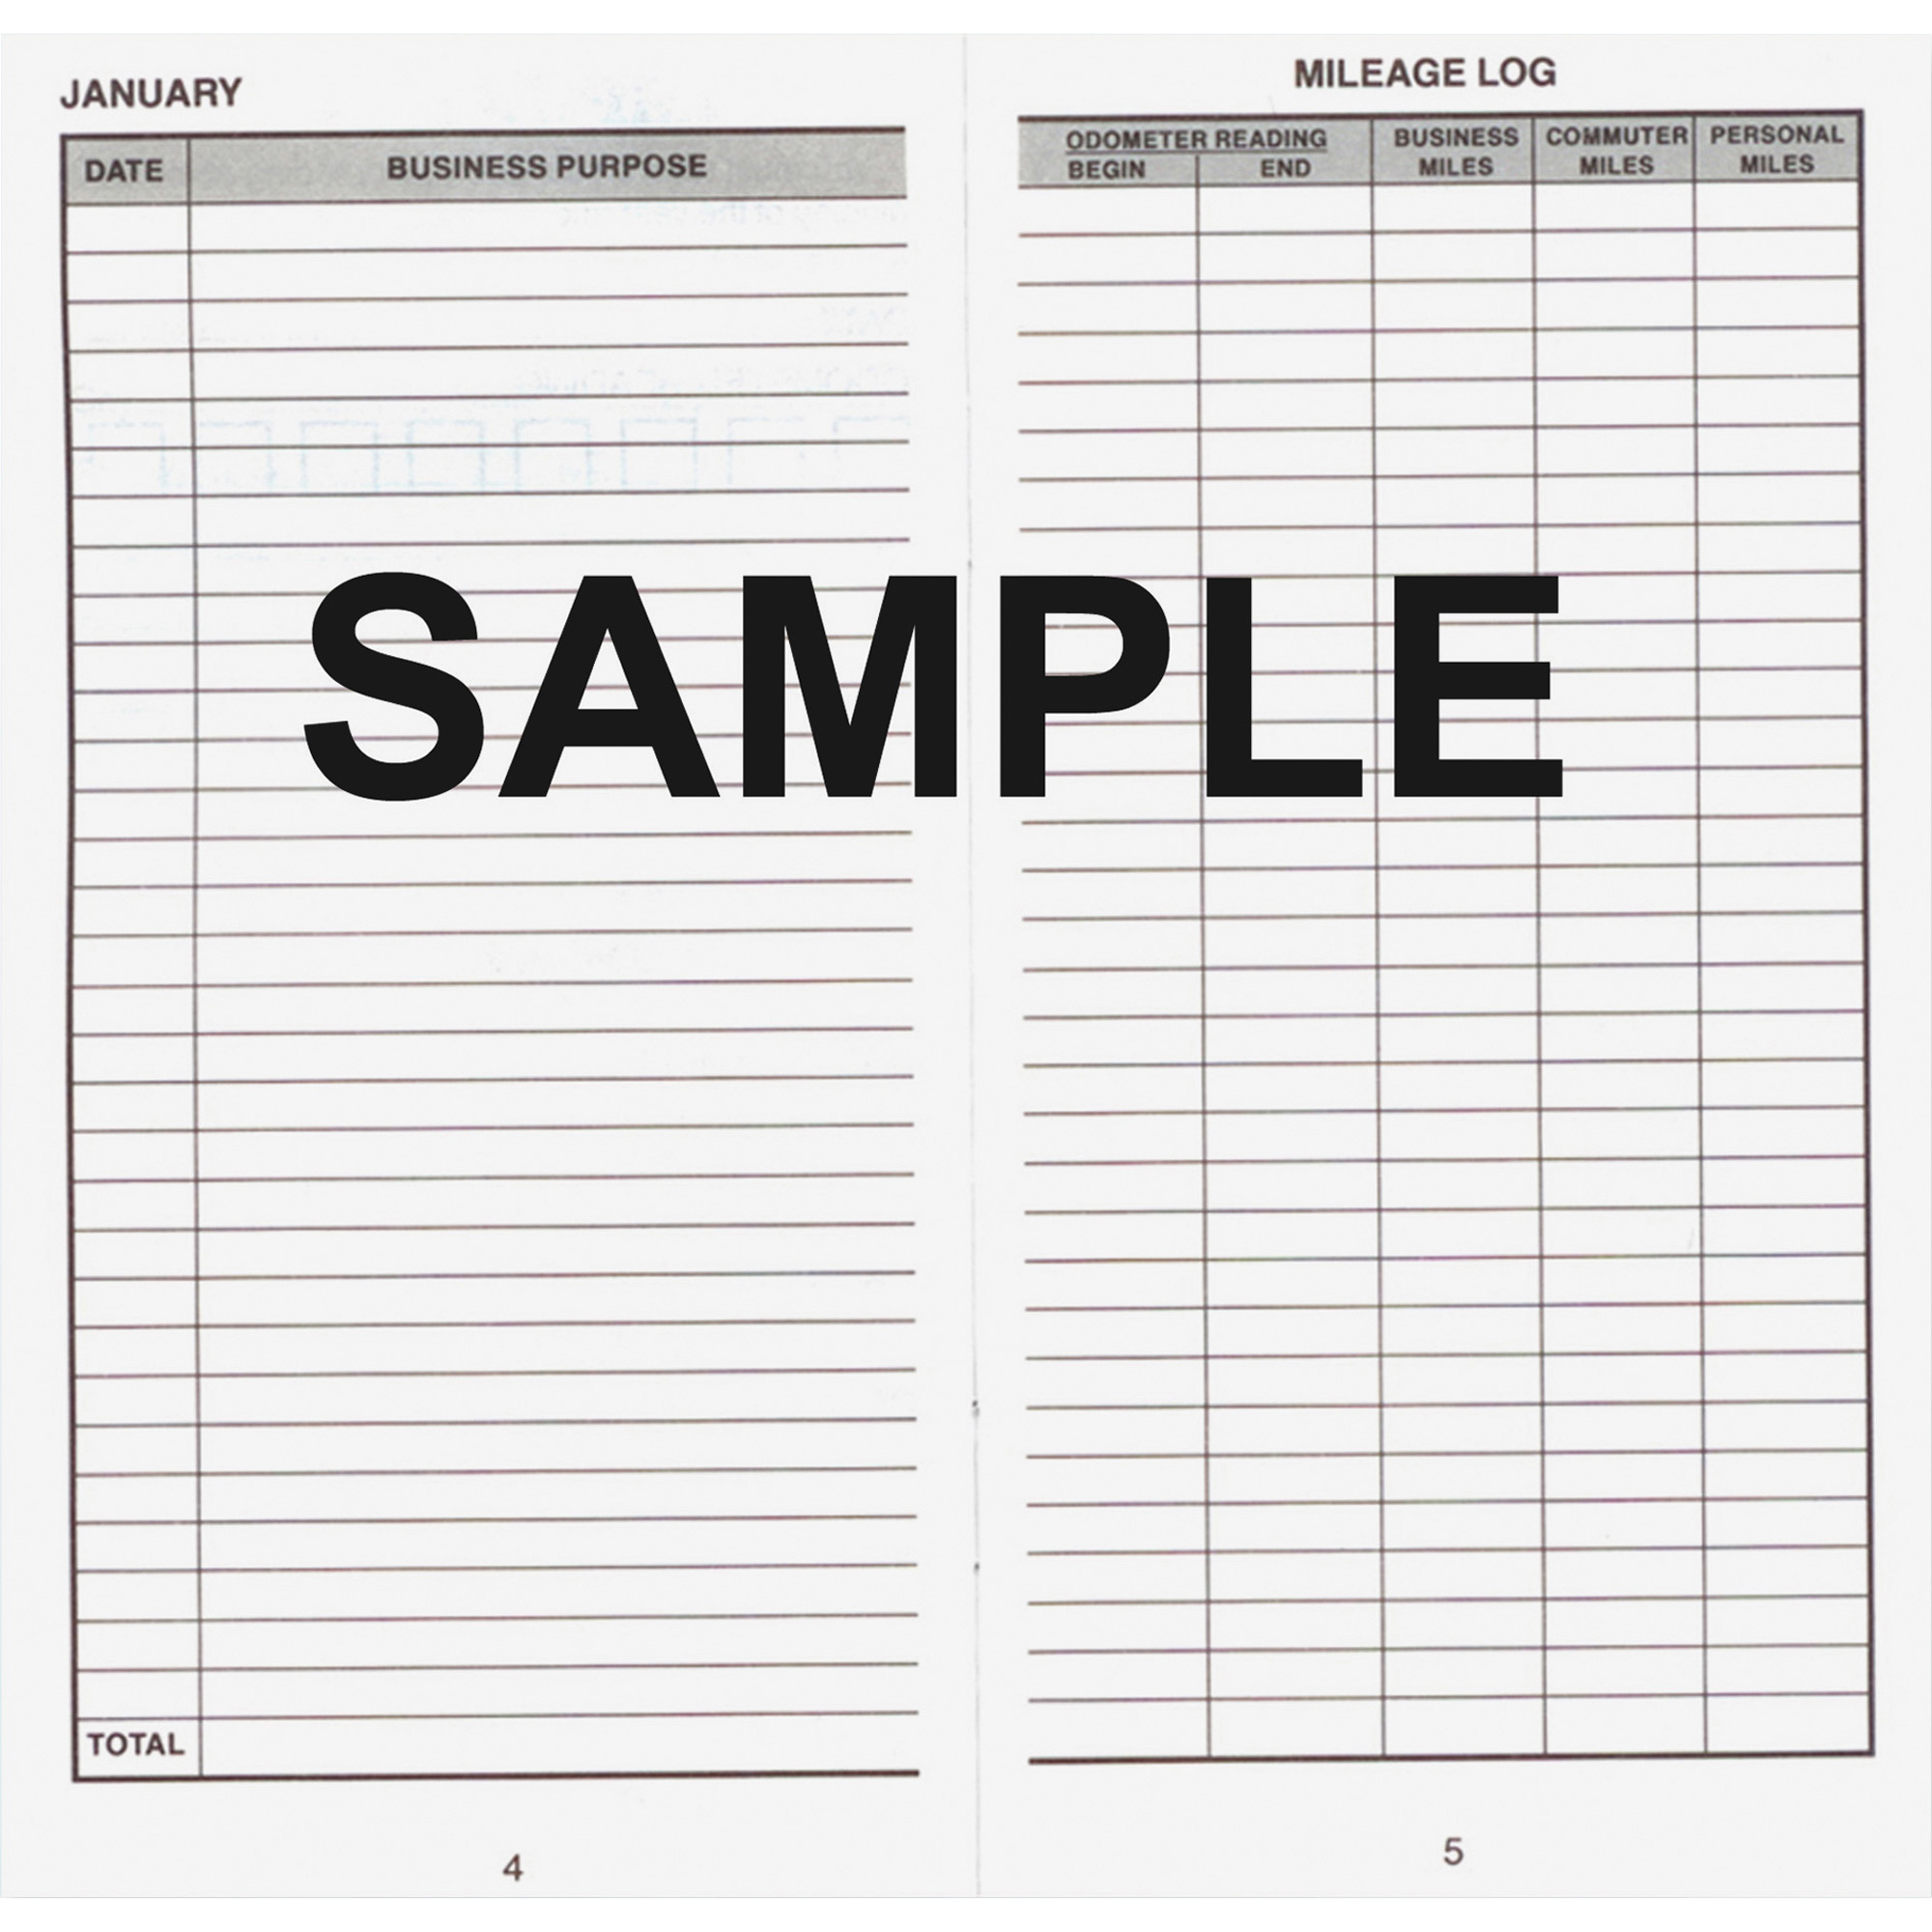 Dome Auto Mileage Log 32 Sheet S 3 25 X 6 25 Sheet Size Gray White Sheet S Gray Print Color Recycled 1 Each Yuletide Office Solutions